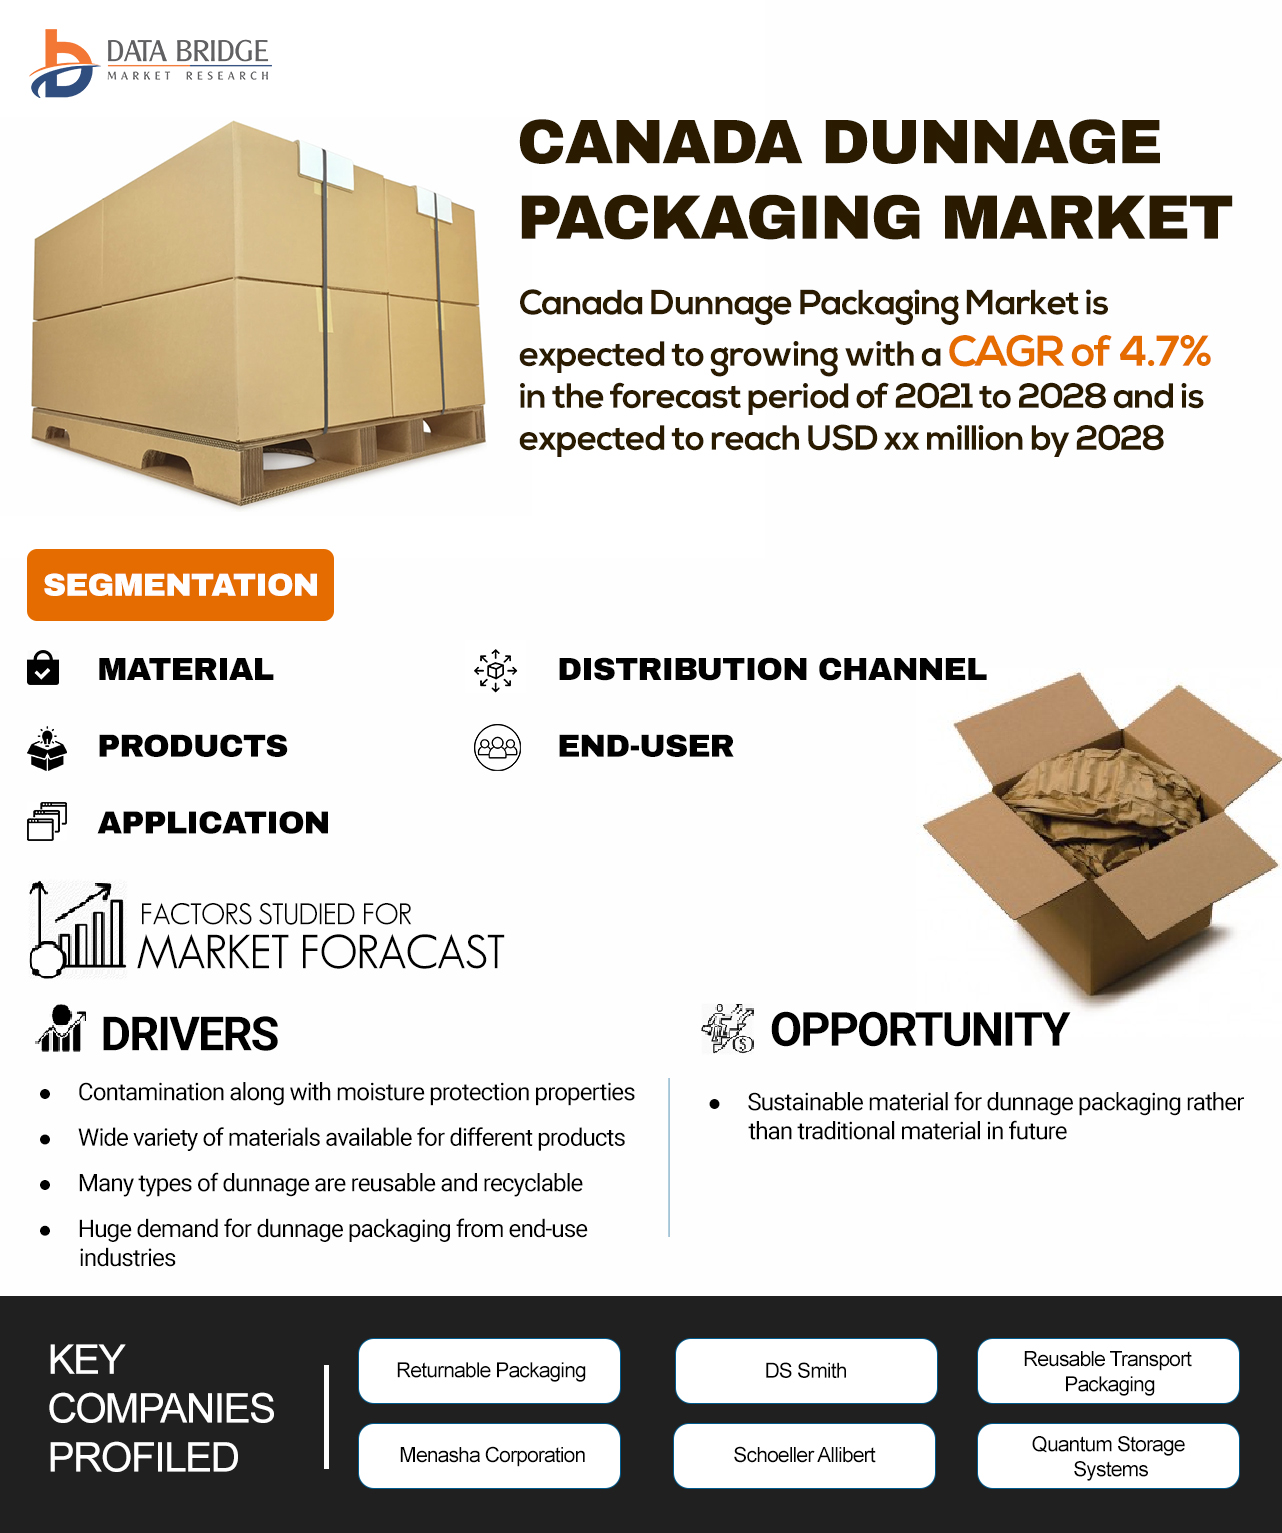 Canada Dunnage Packaging Market